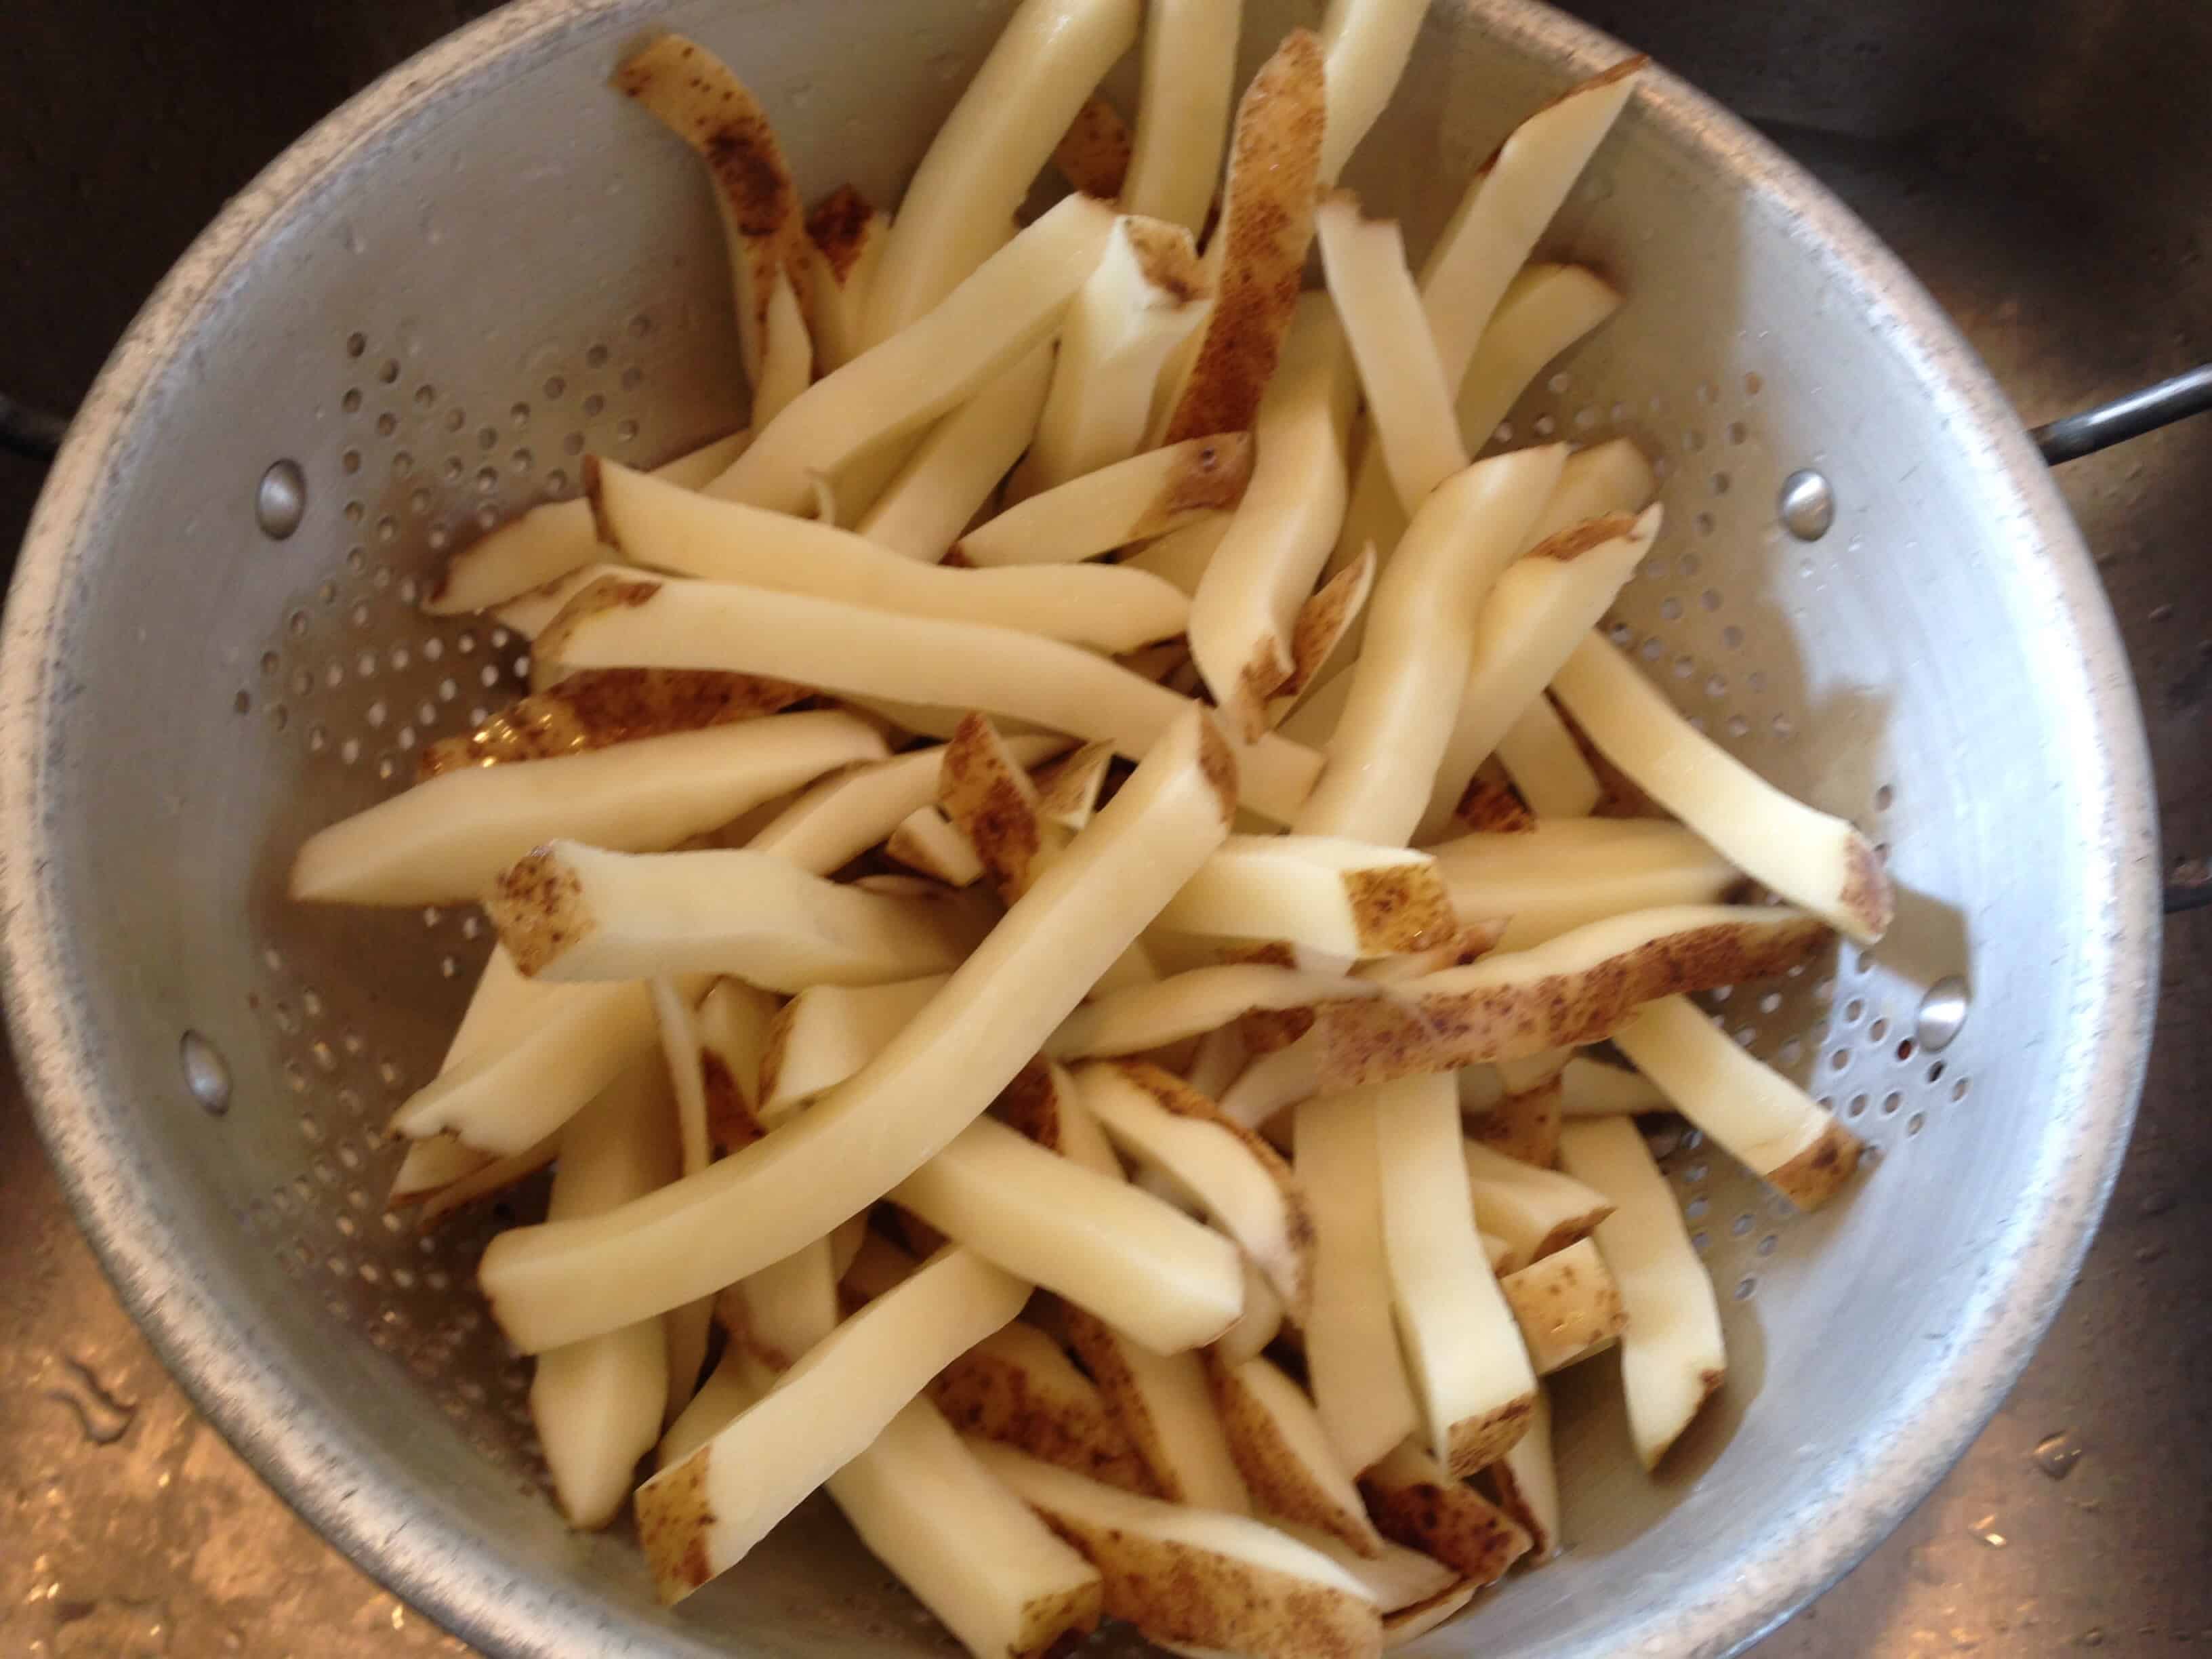 Draining the water off the fries before they go in the air fryer